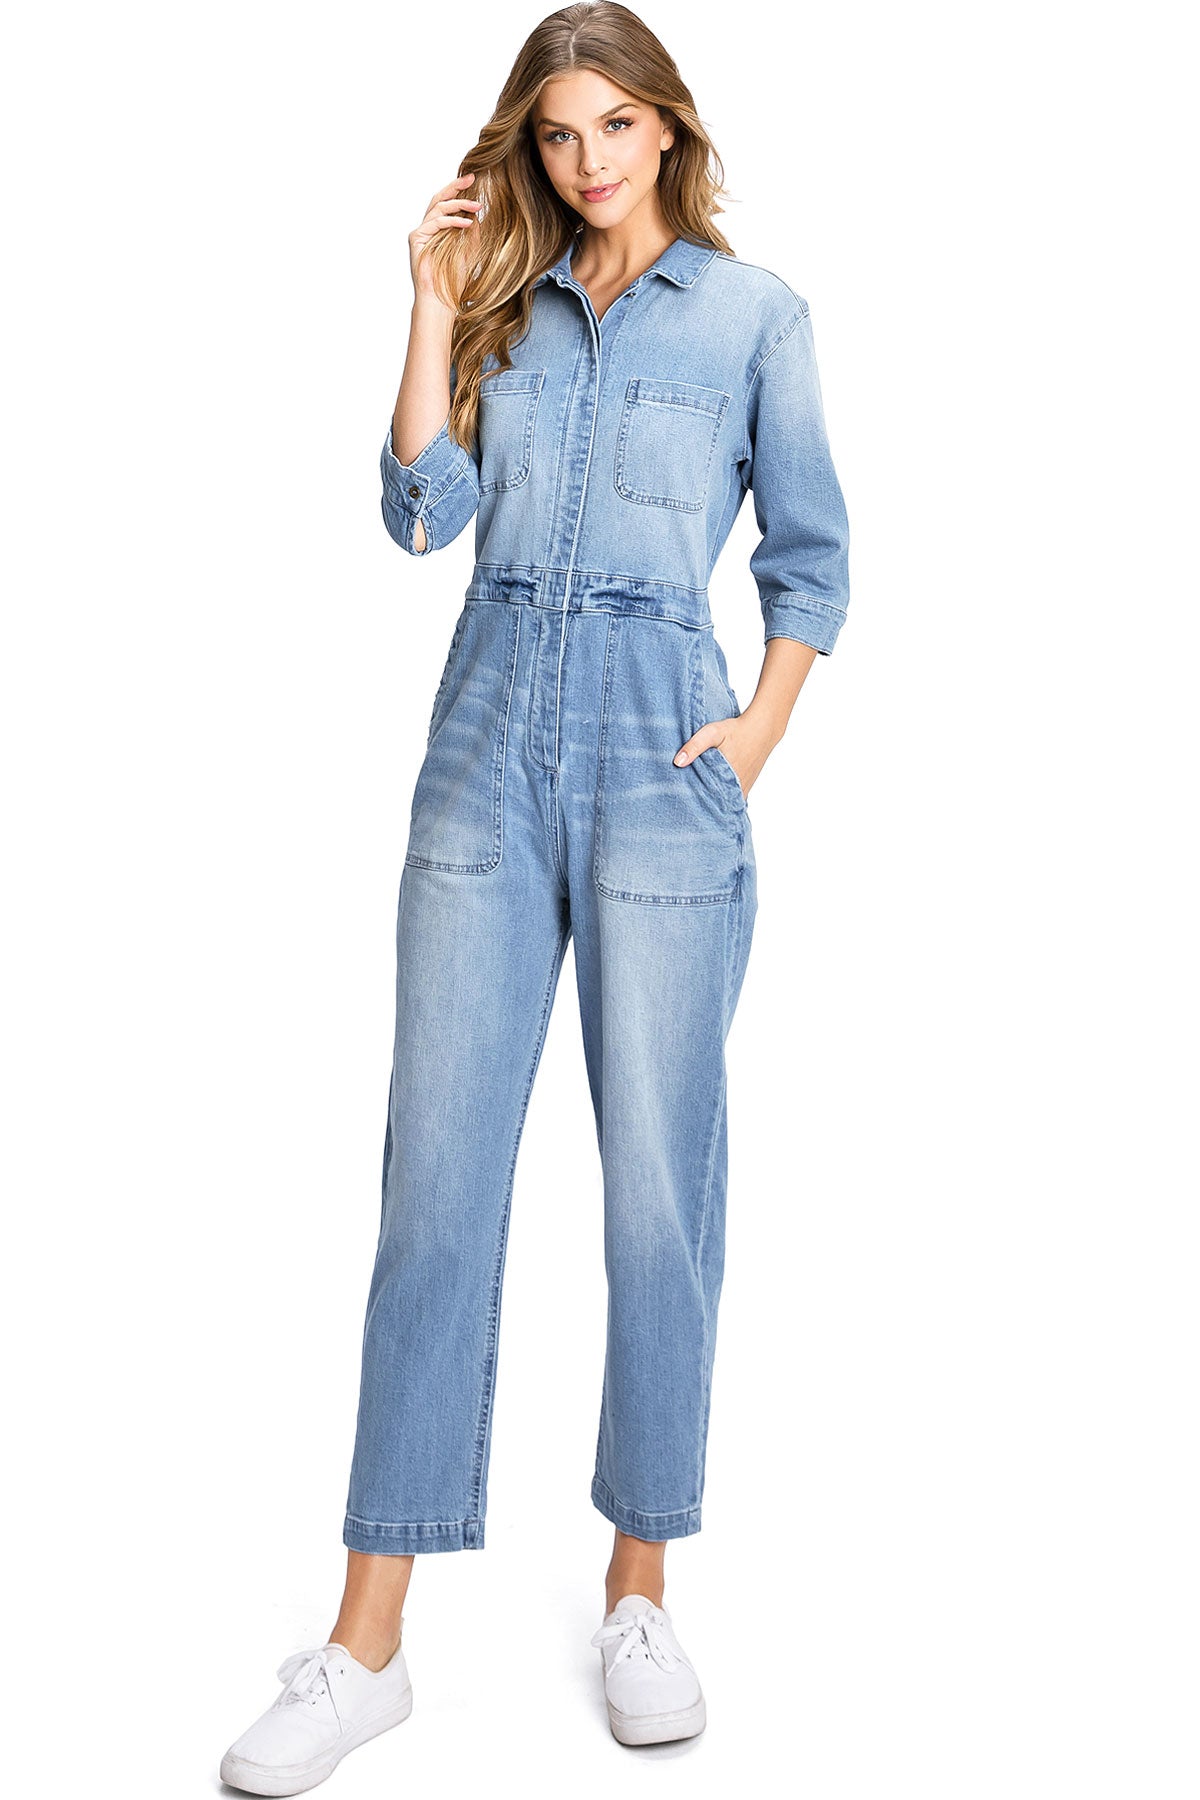 Lana Roux Aviator Relax Denim Utility Coverall Jumpsuit – Pink Ice